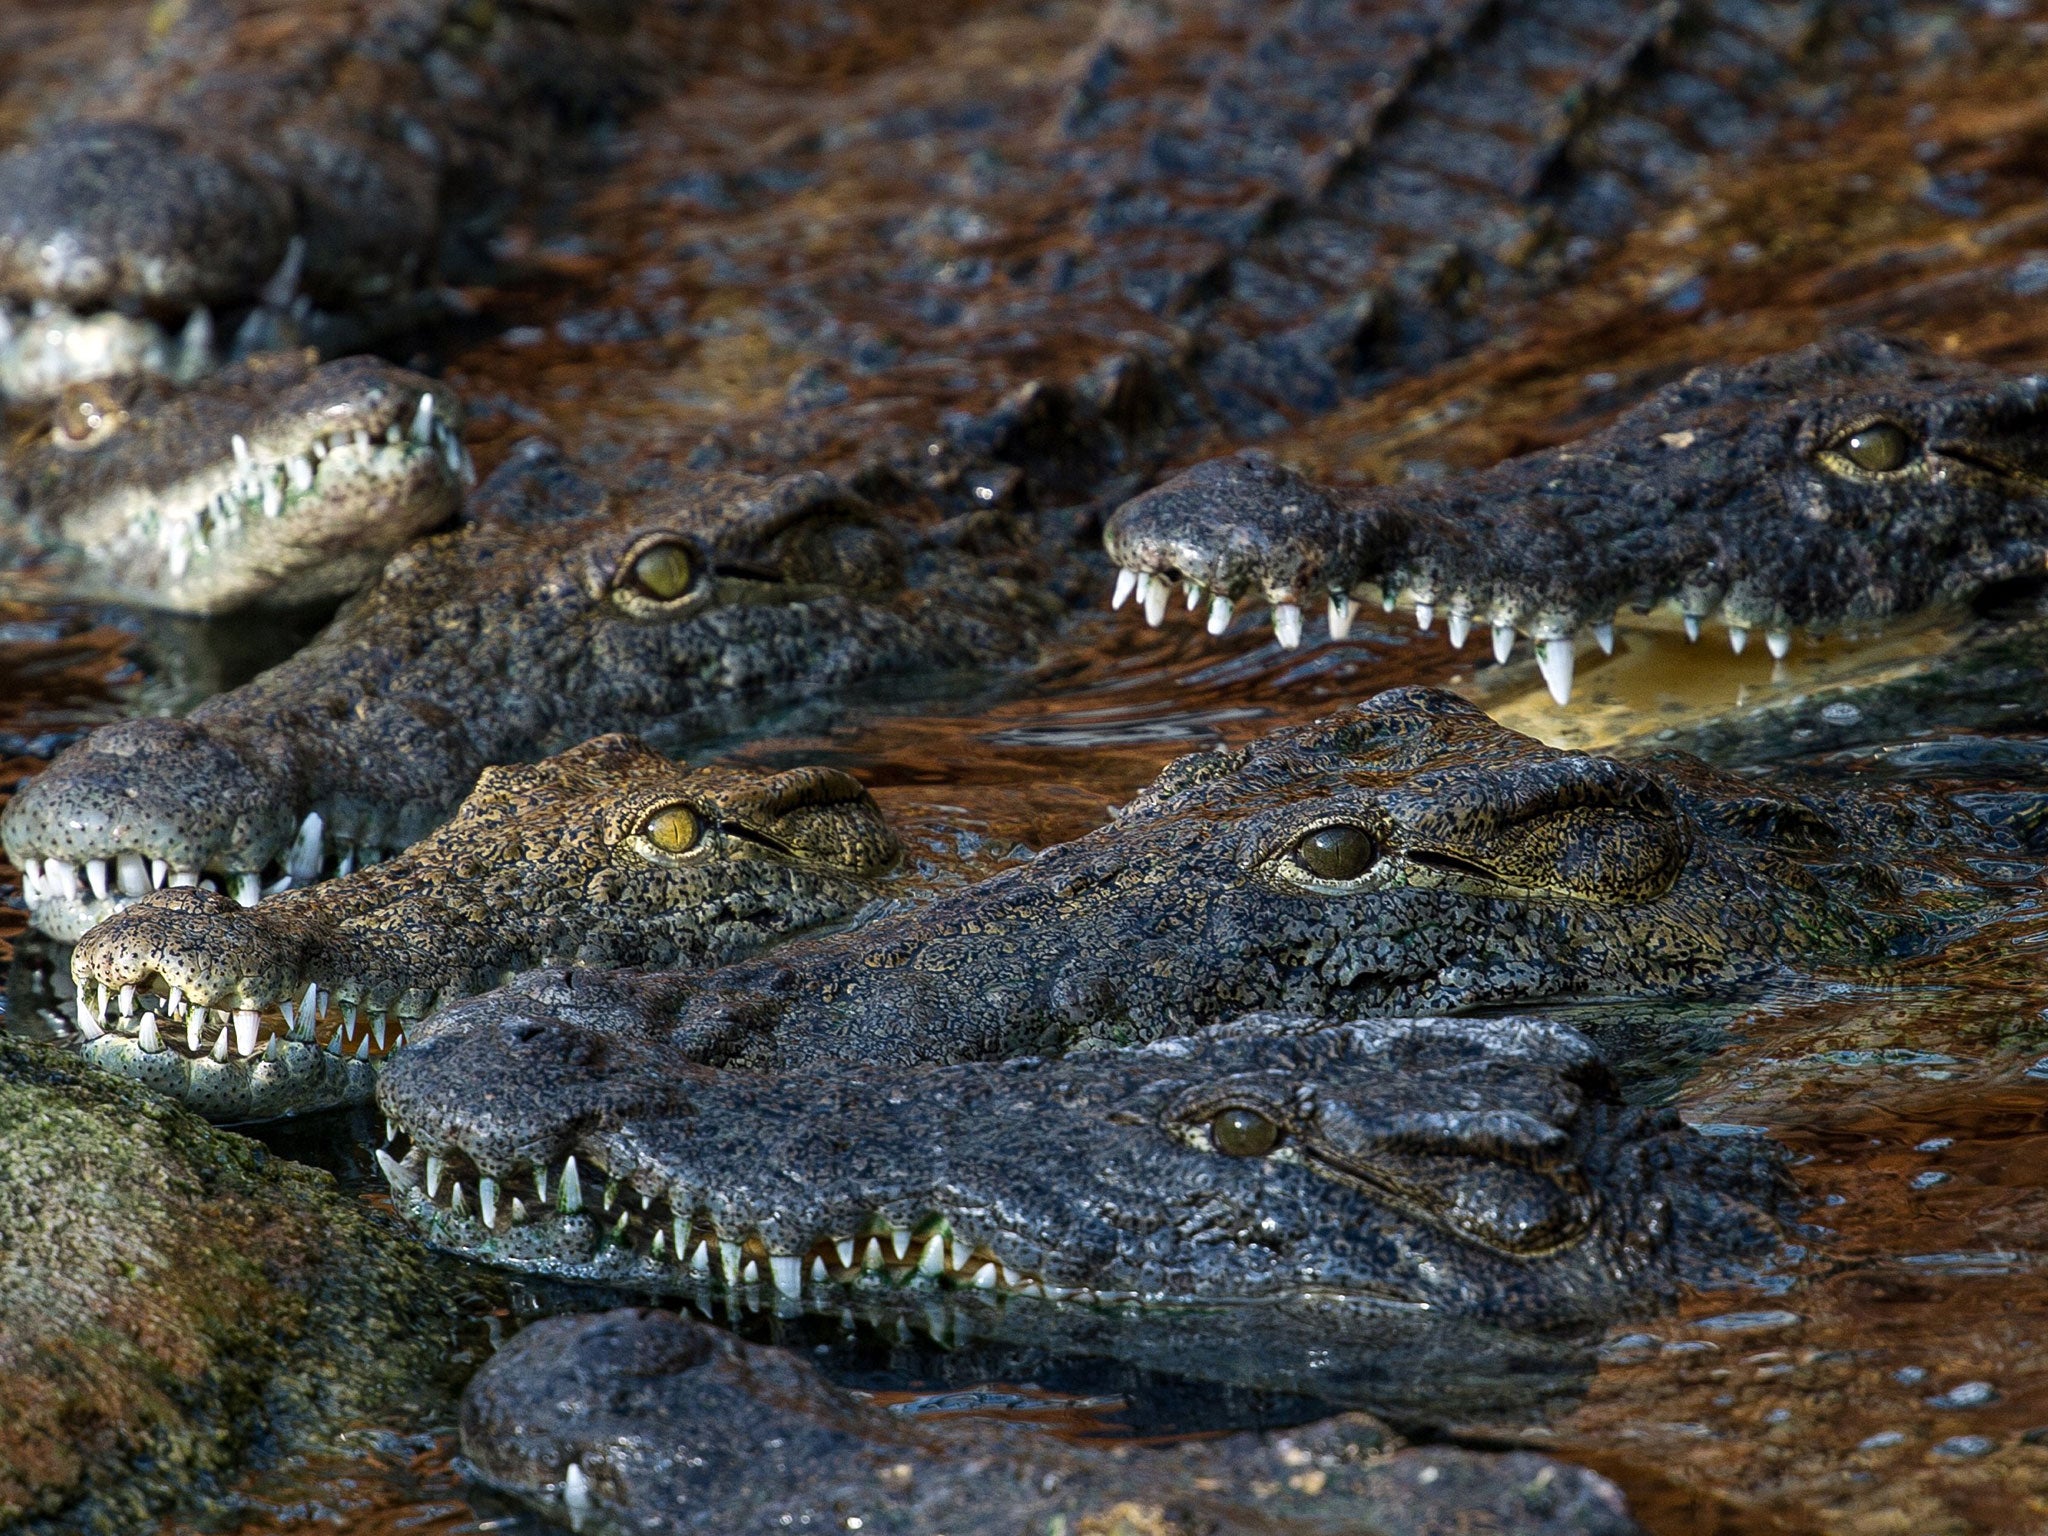 Nile Crocodiles are known for lying in wait for their prey